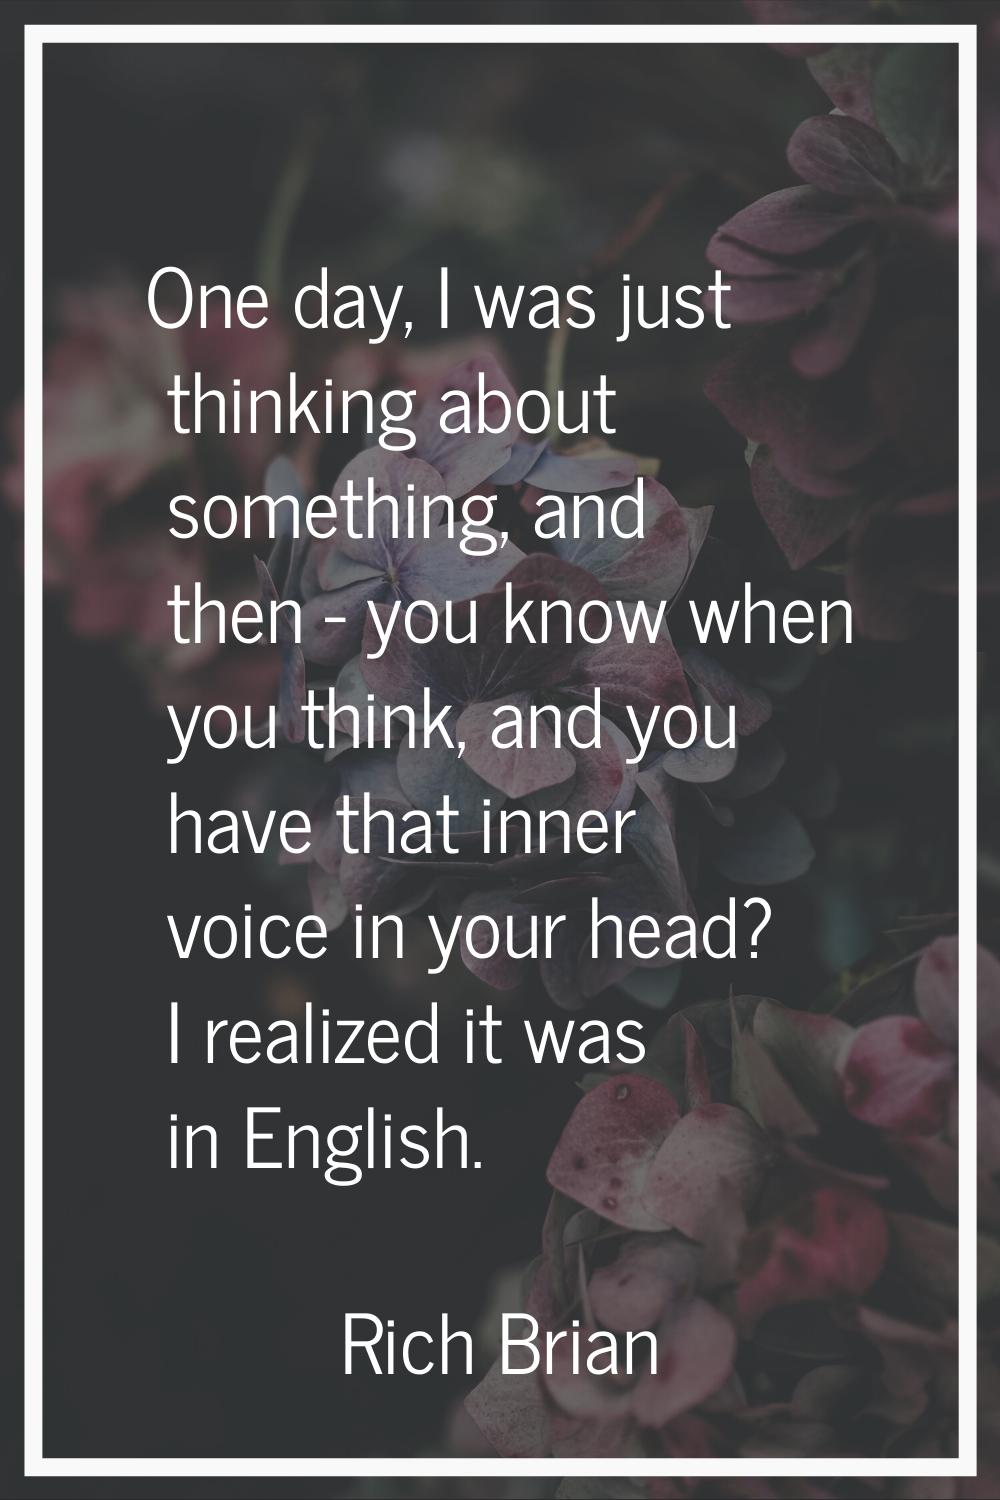 One day, I was just thinking about something, and then - you know when you think, and you have that